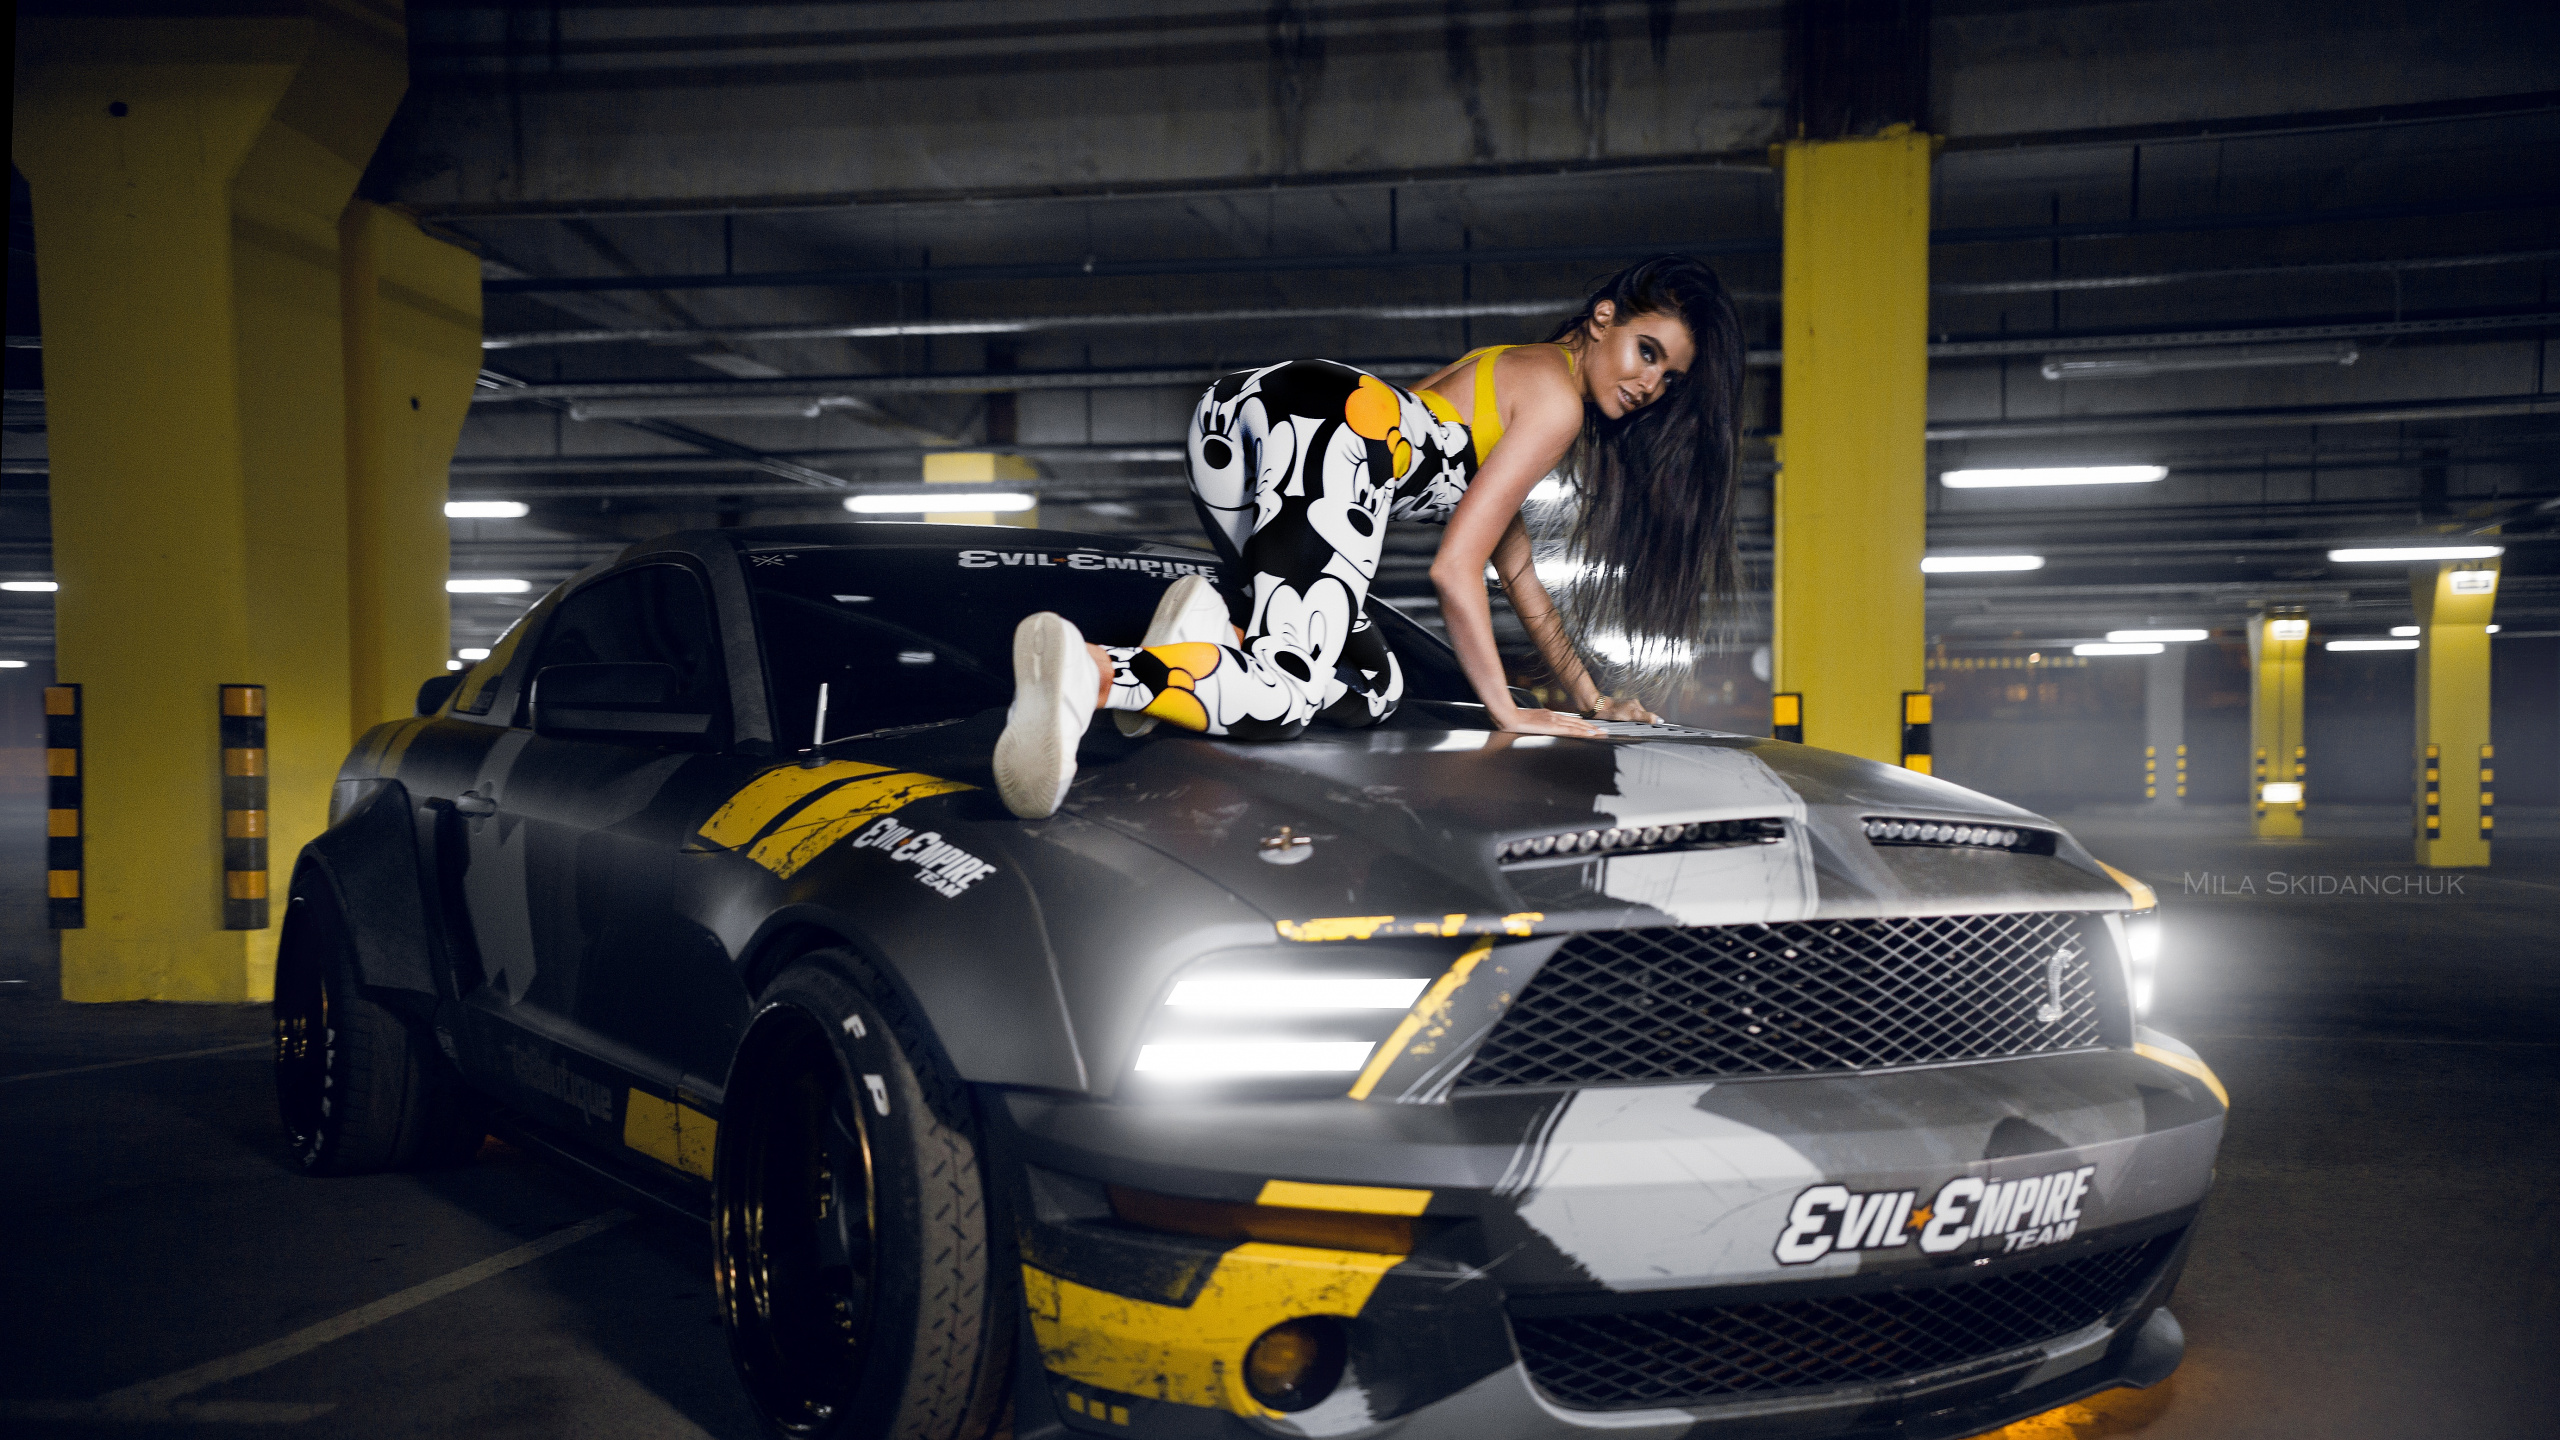 Woman in Black and White Floral Dress Riding on Black and Yellow Sports Car. Wallpaper in 2560x1440 Resolution